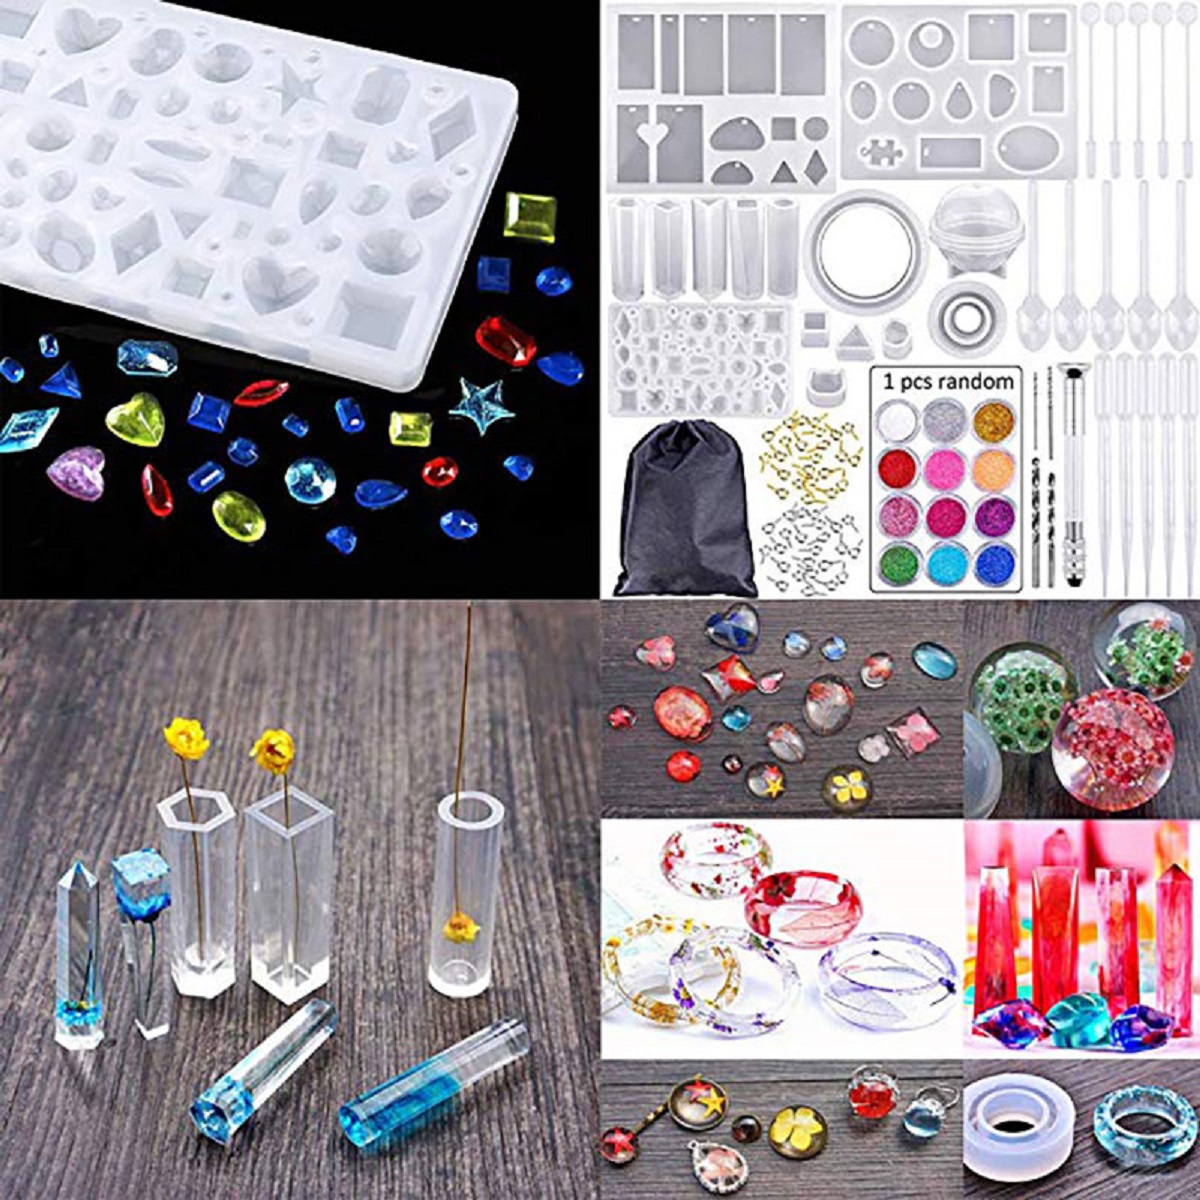 83x-Silicone-Resin-Casting-Mold-Tool-Sets-Kit-DIY-Pendant-Jewelry-Bracelet-Making-1808640-7